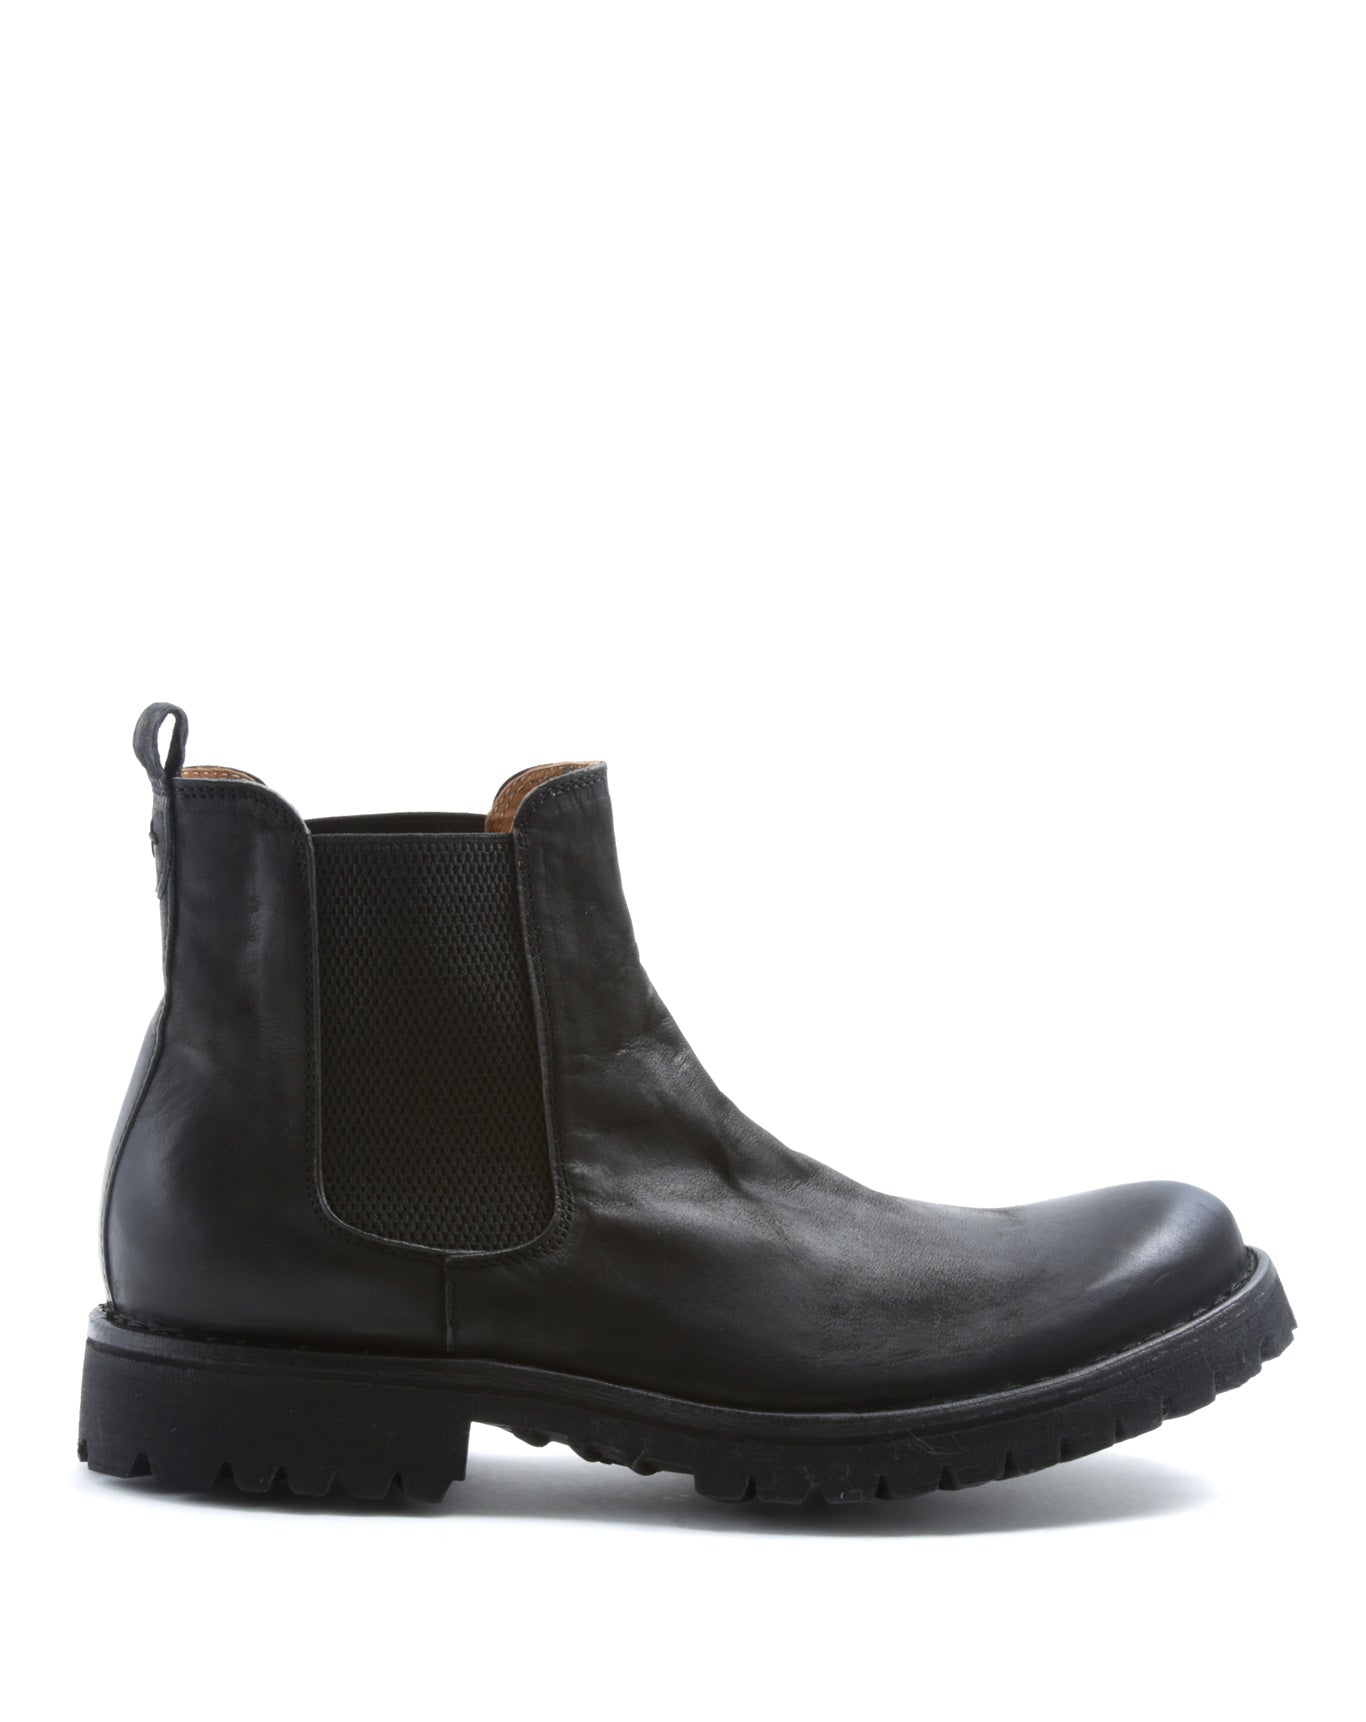 FIORENTINI + BAKER, ETERNITY MASSIVE M-ETEX, Classic Chelsea boots from the Eternity line for a timeless style redesigned with a new thicker sole. Handcrafted by skilled artisans. Made in Italy. Made to last.